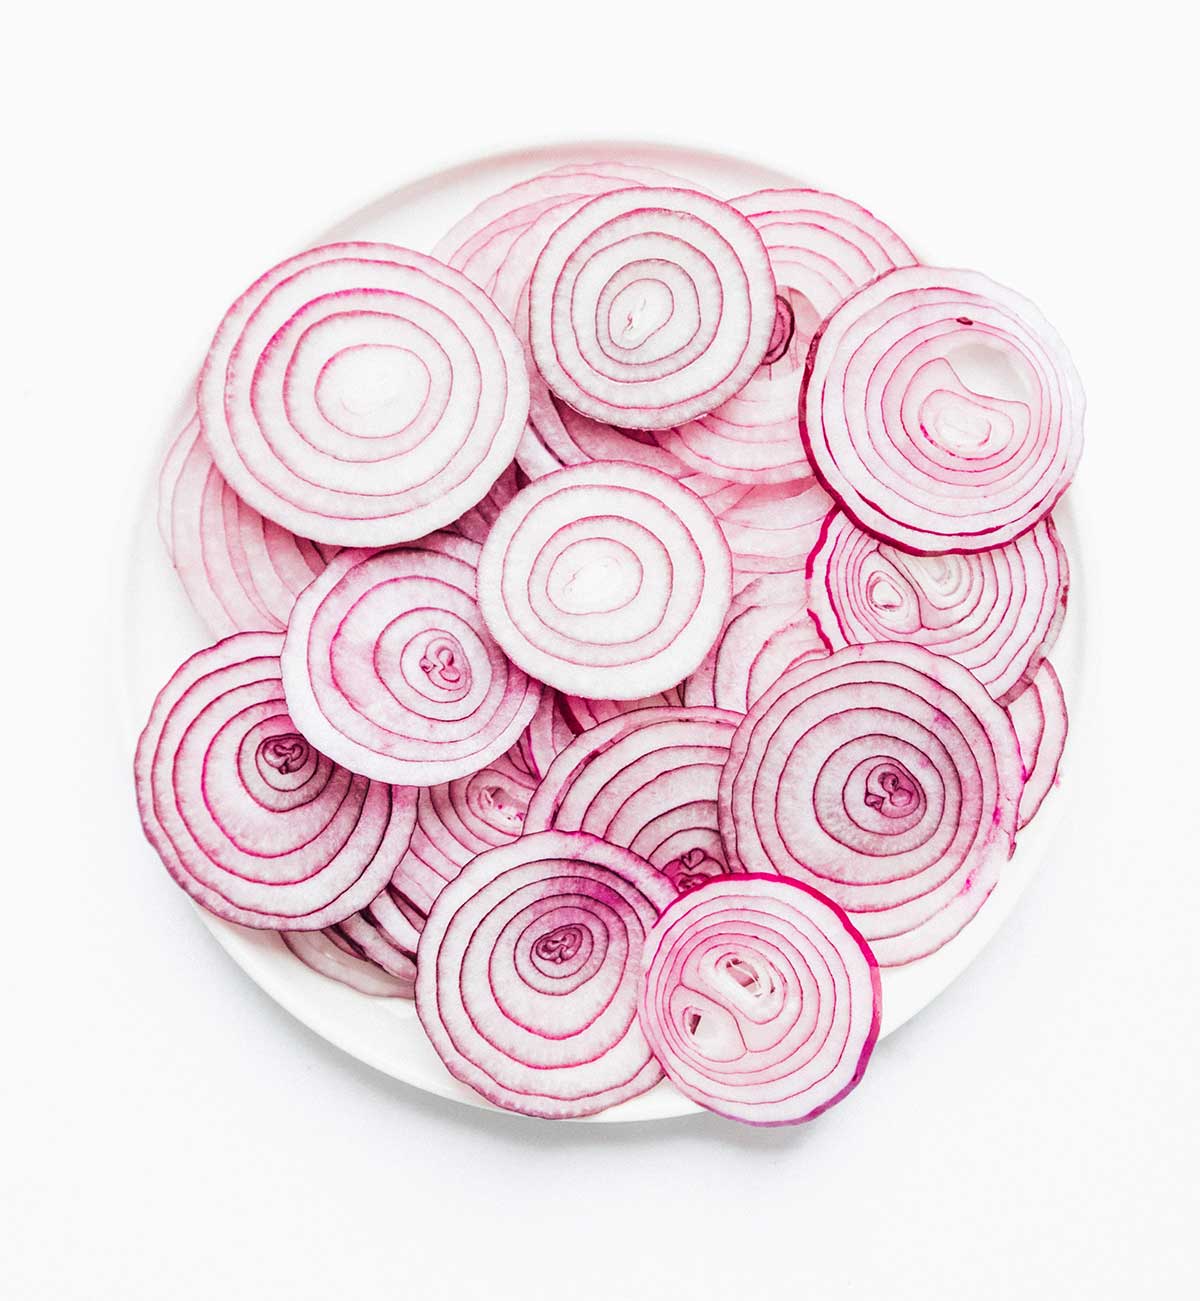 A white plate filled with slices of red onions